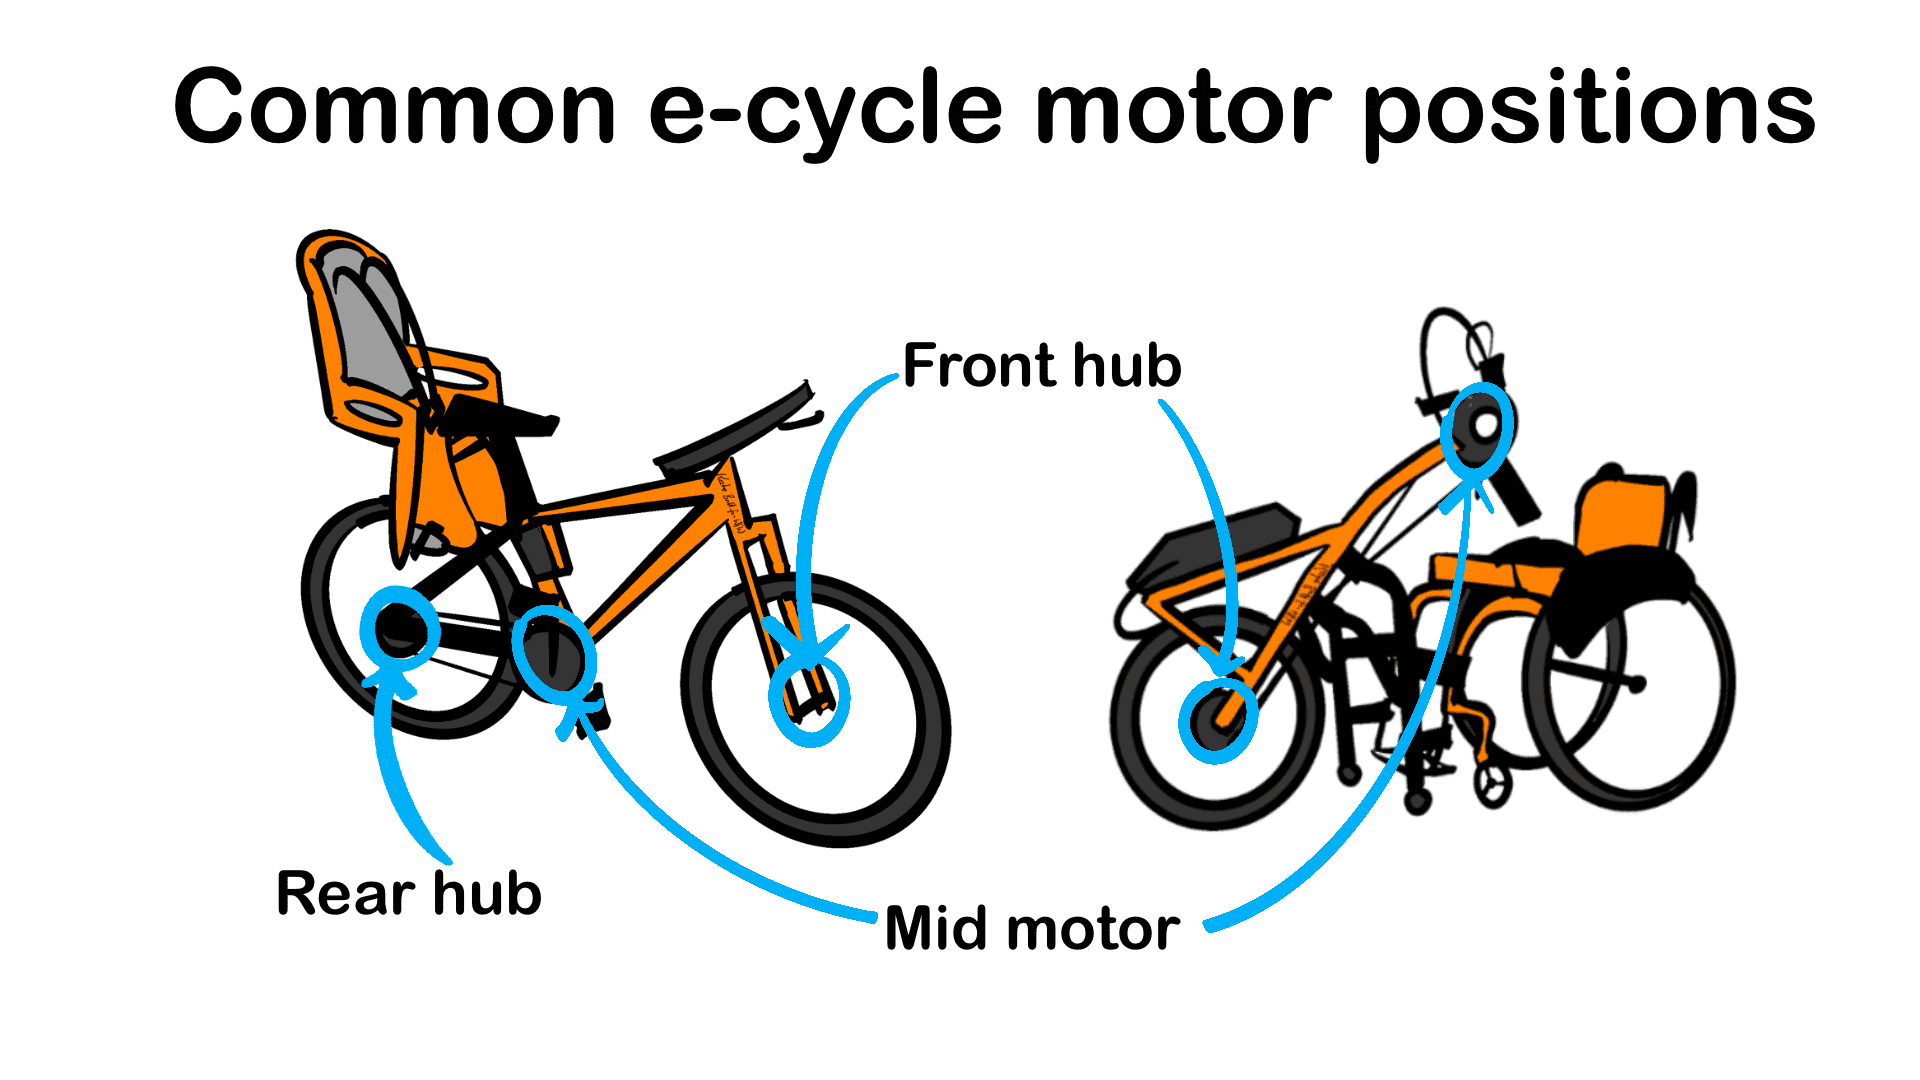 Graphic titled common e-cycle motor positions has a drawing of a bicycle with rear child seat on the left and a manual wheelchair with clip-on handcycle on the right.
Blue arrows show:
Hub motors can go in any wheel hub - "front hub" motors on the handcycle wheel or front bicycle wheel and "rear hub" motor in the rear bicycle wheel.
Mid motors are located with the pedal cranks on both the handcycle and standard bicycle.